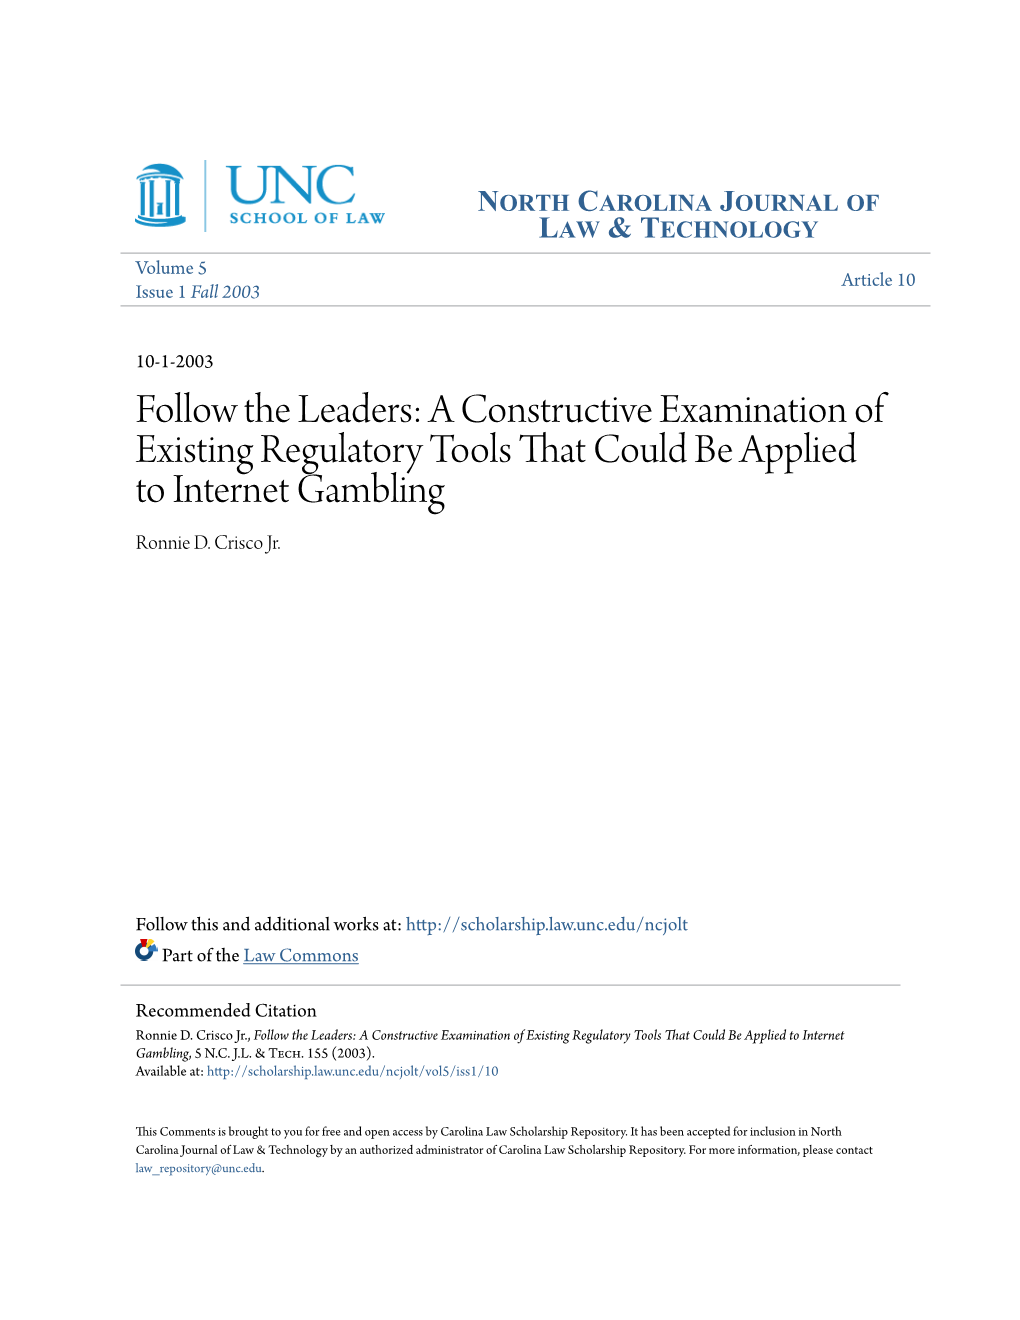 Follow the Leaders: a Constructive Examination of Existing Regulatory Tools That Could Be Applied to Internet Gambling Ronnie D